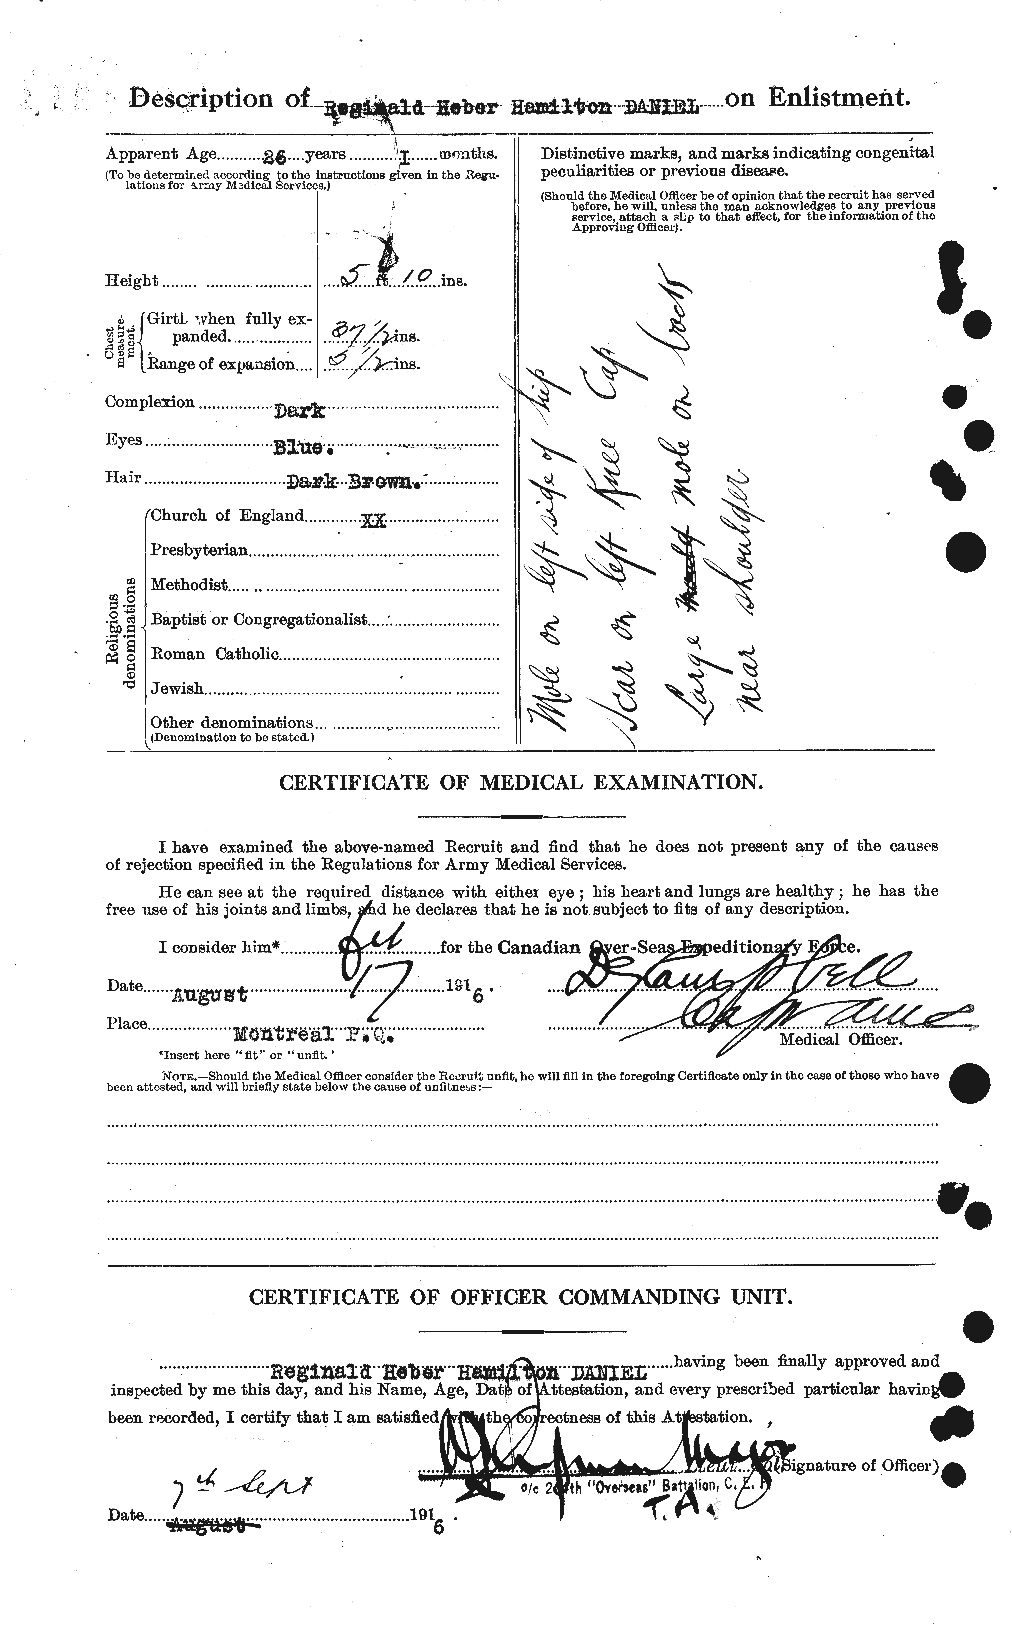 Personnel Records of the First World War - CEF 278048b